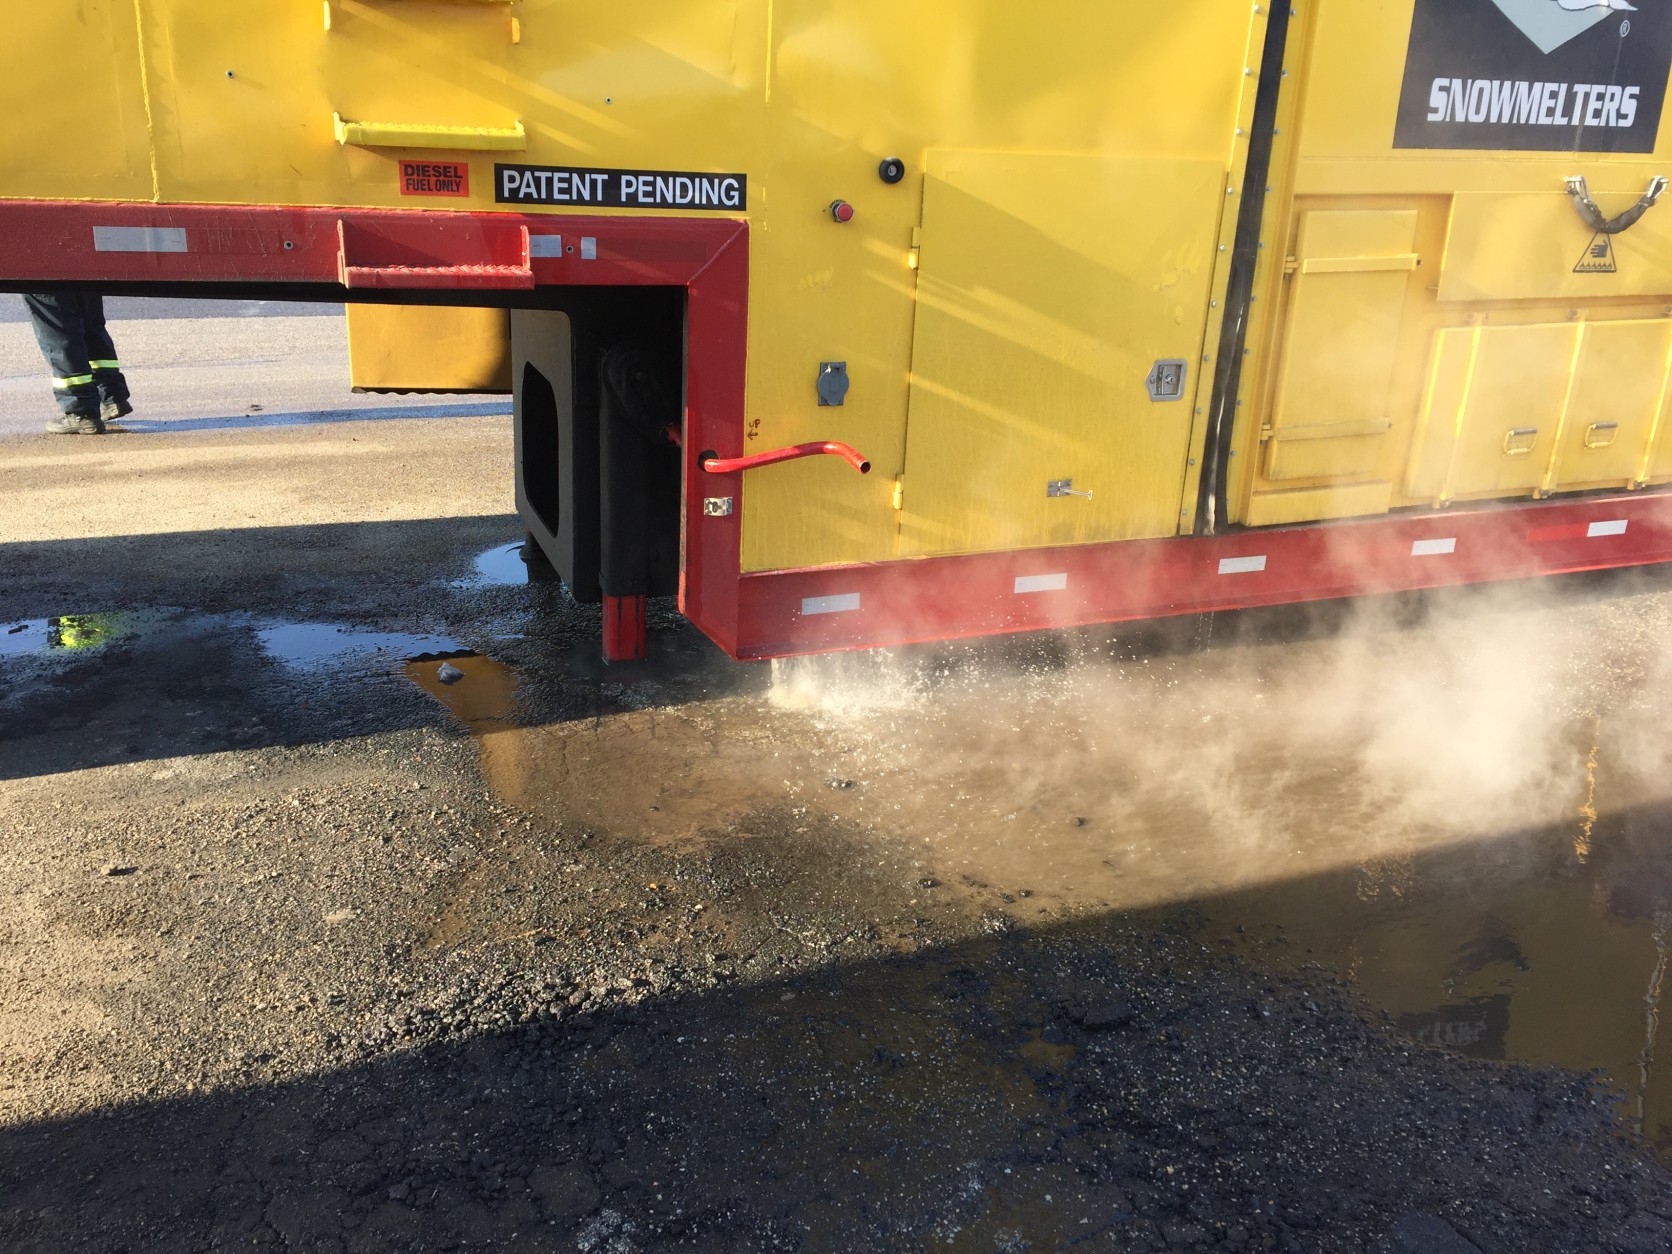 Here's a look at the hot water pouring out of the snow melter. There are filters both inside the machine and outside that prevent debris and pollutants from getting into the Anacostia River. (WTOP/Michelle Basch)